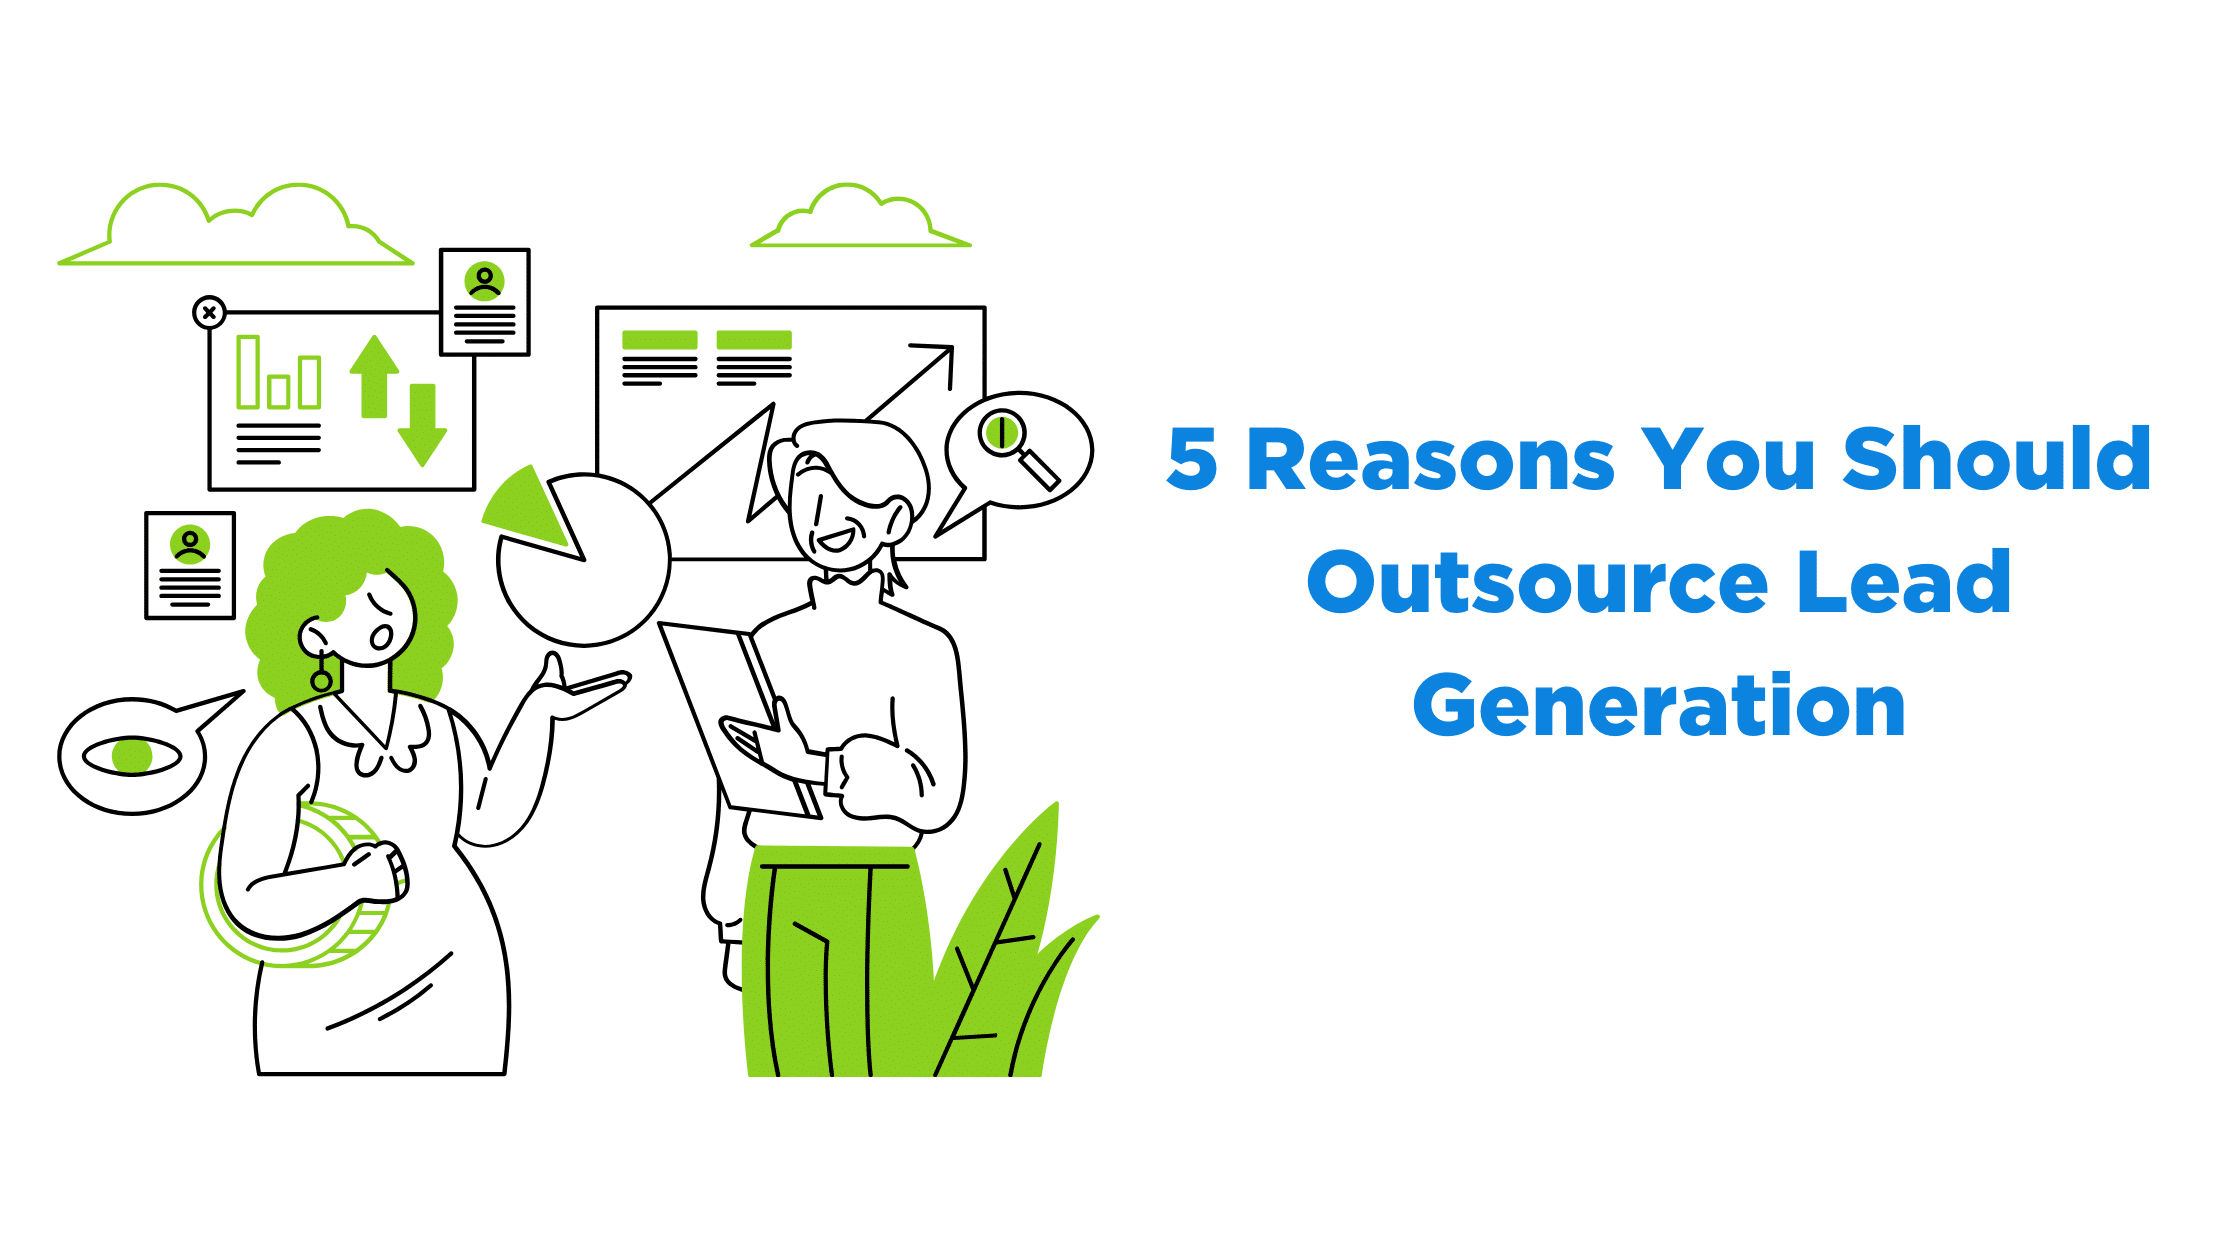 5 Reasons You Should Outsource Lead Generation